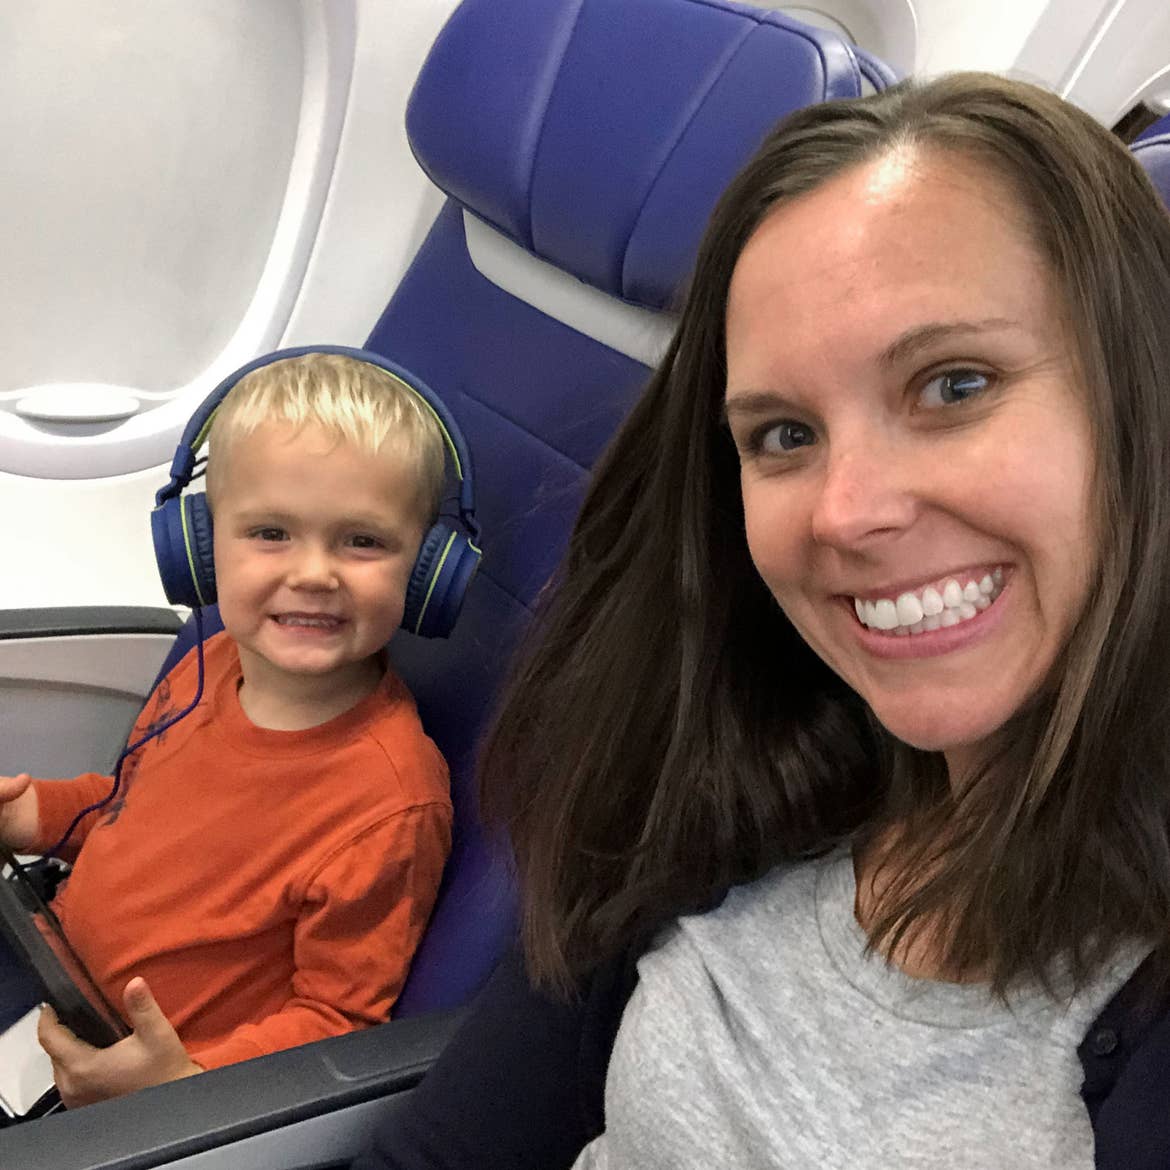 Author, Sarah, and son, Logan, sit near the window seat on their airplane pre-COVID.